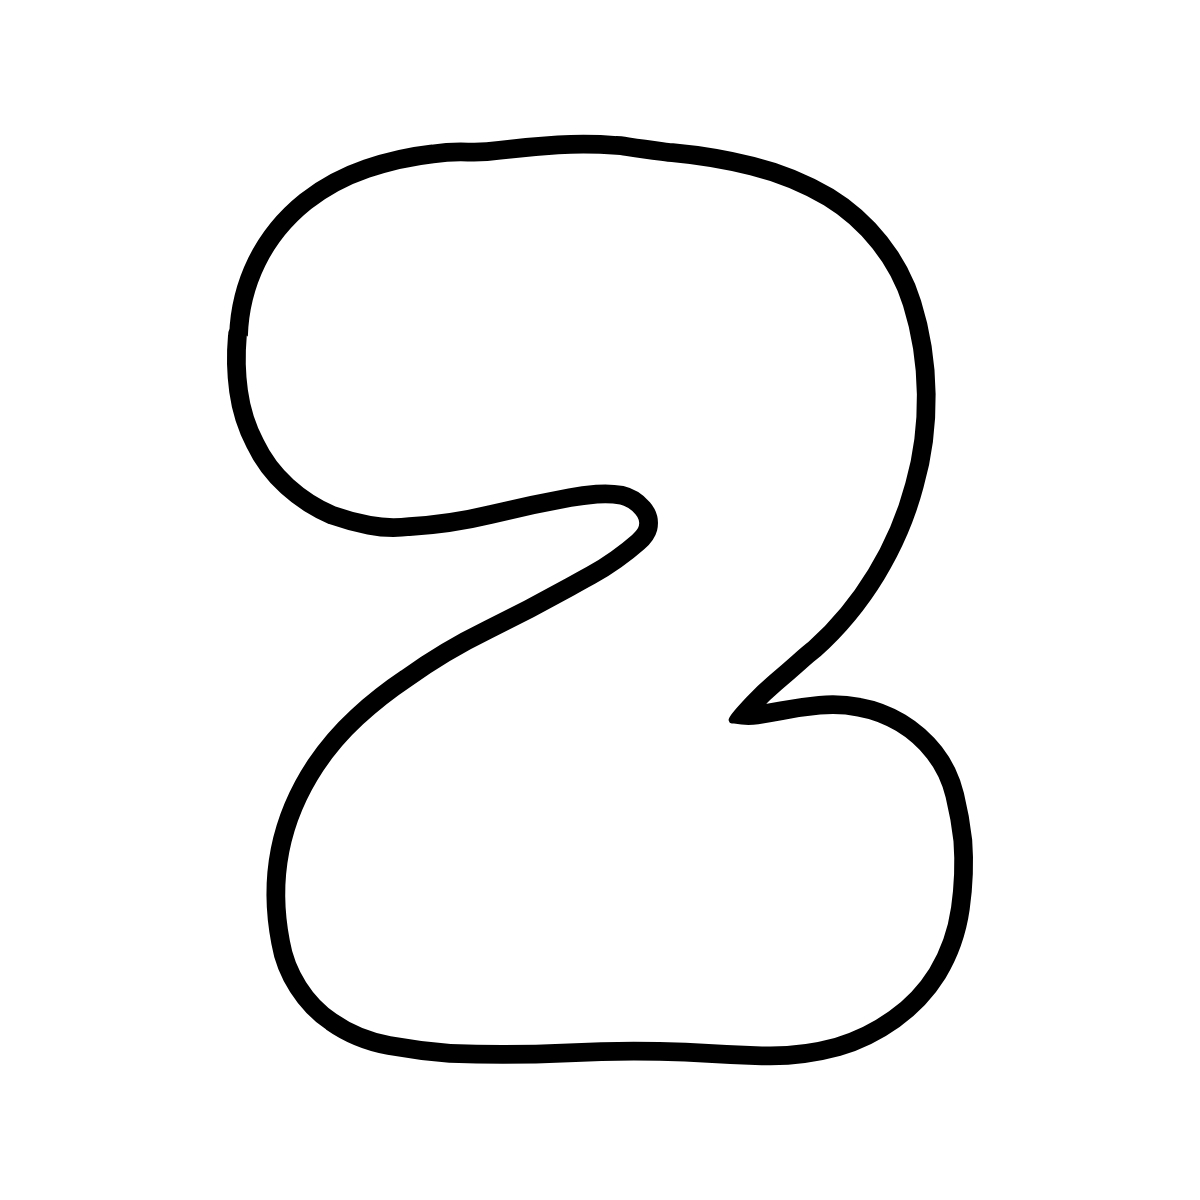 the number 2 in bubble letters